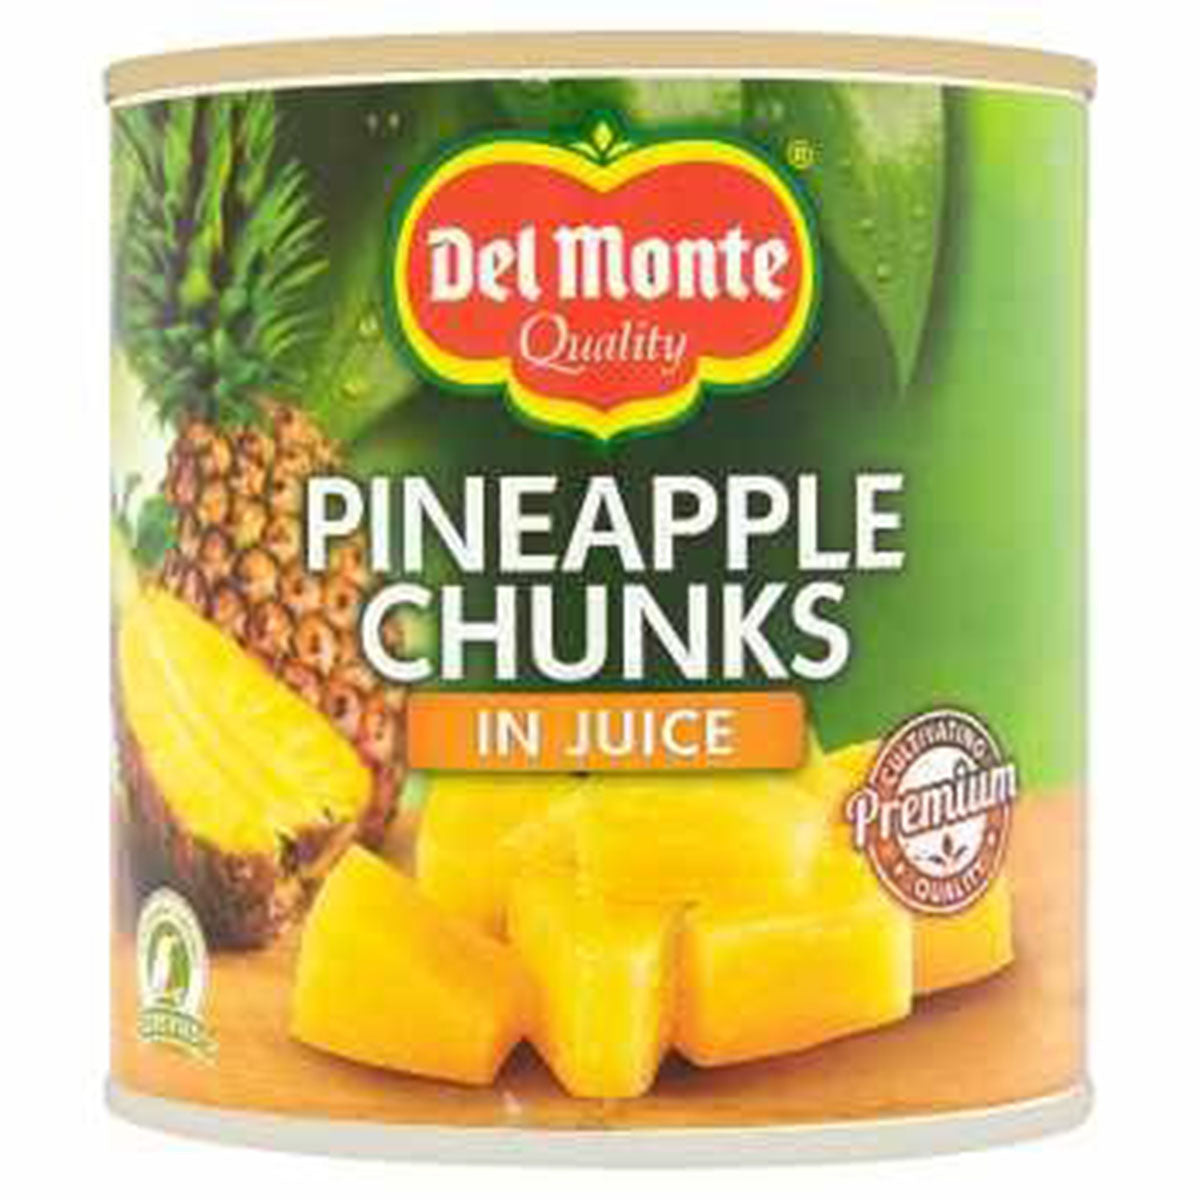 Del Monte - Pineapple Chunks in Juice - 435g - Continental Food Store